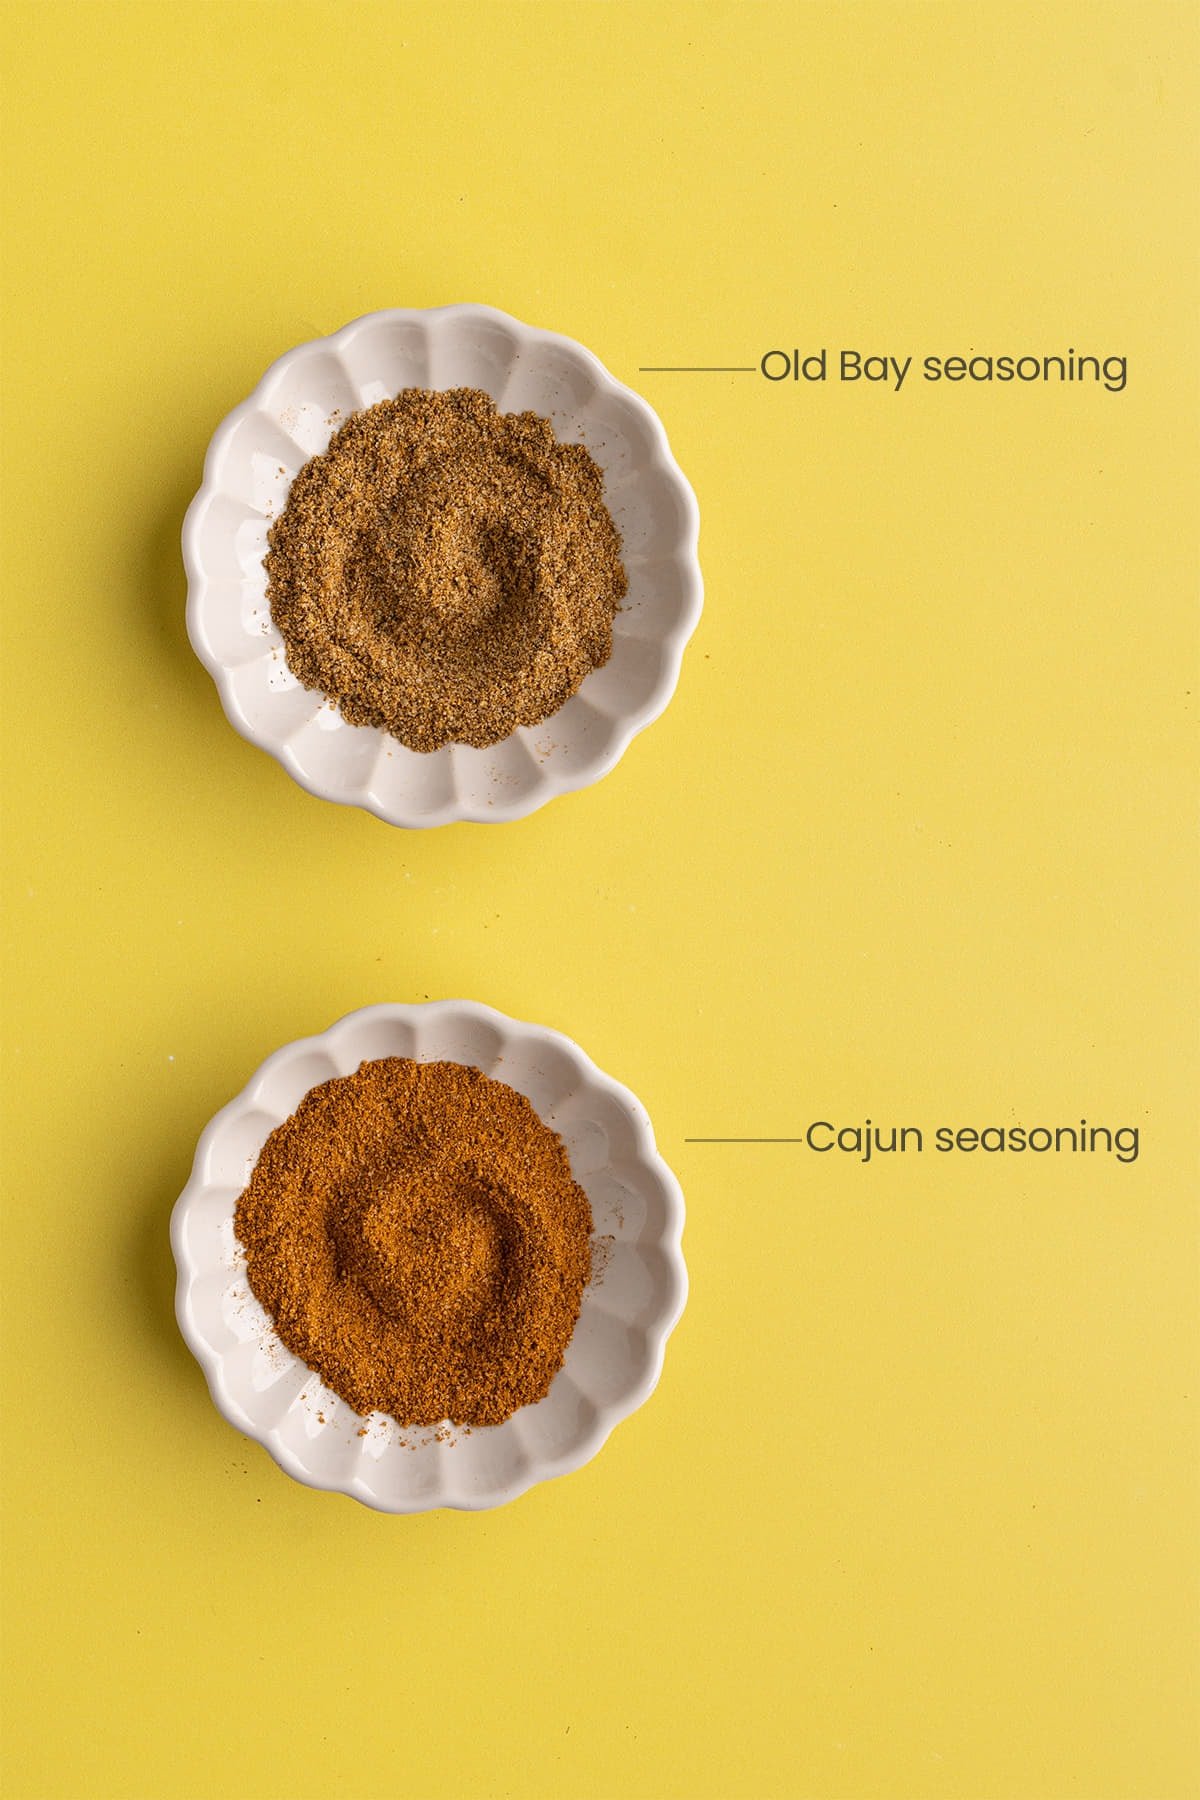 Two dishes of seasoning to compare Cajun Seasoning and Old Bay Seasoning